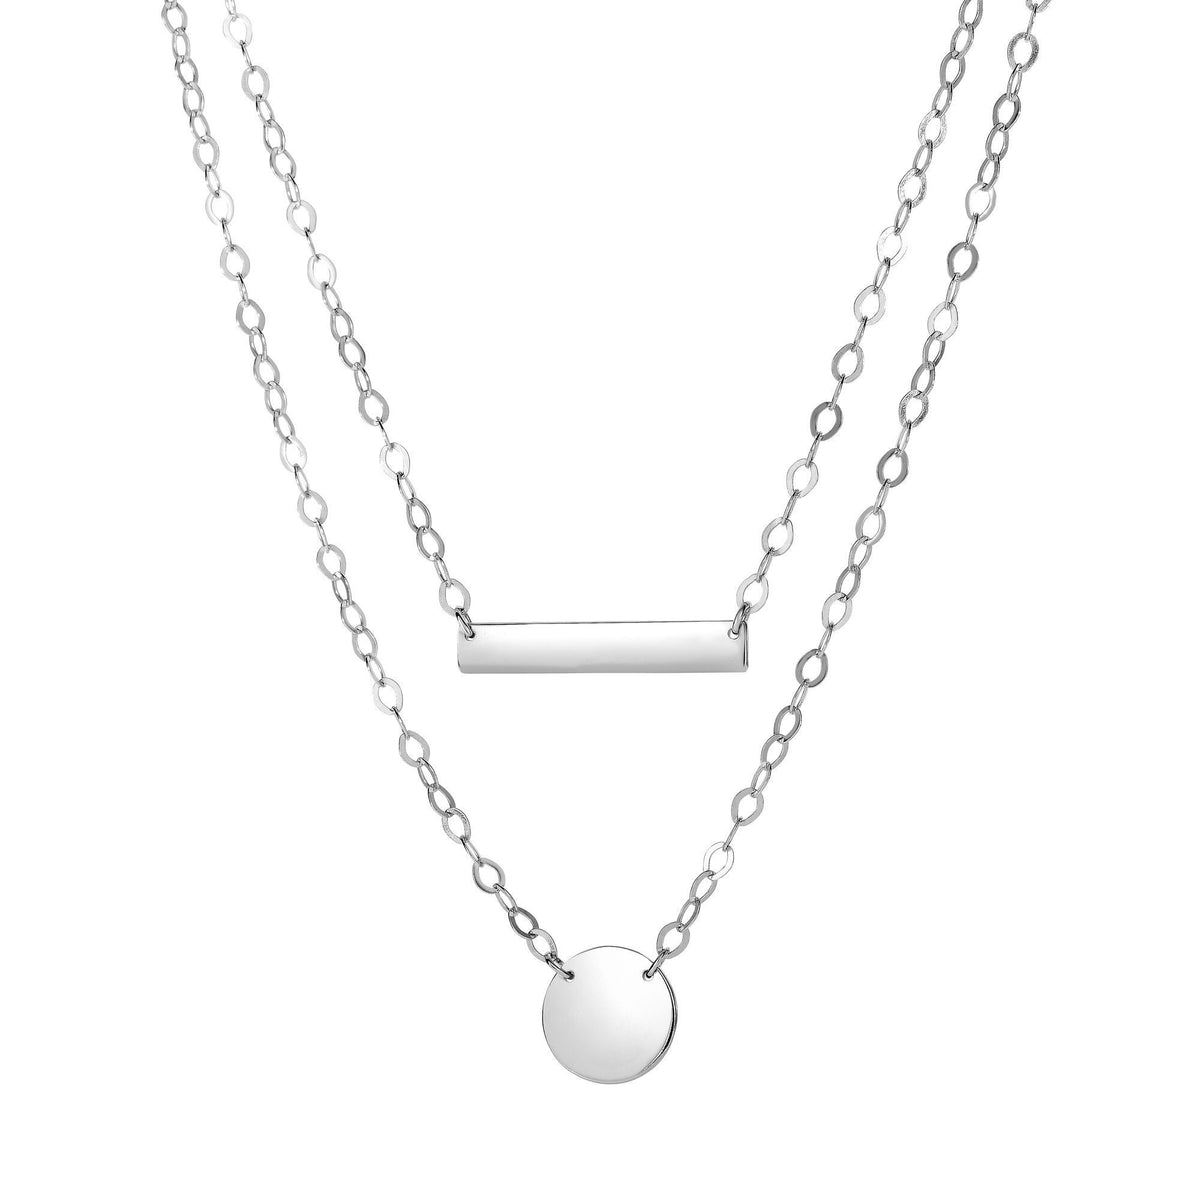 Sterling Silver Bar And Disc Pendant Necklace, 18"